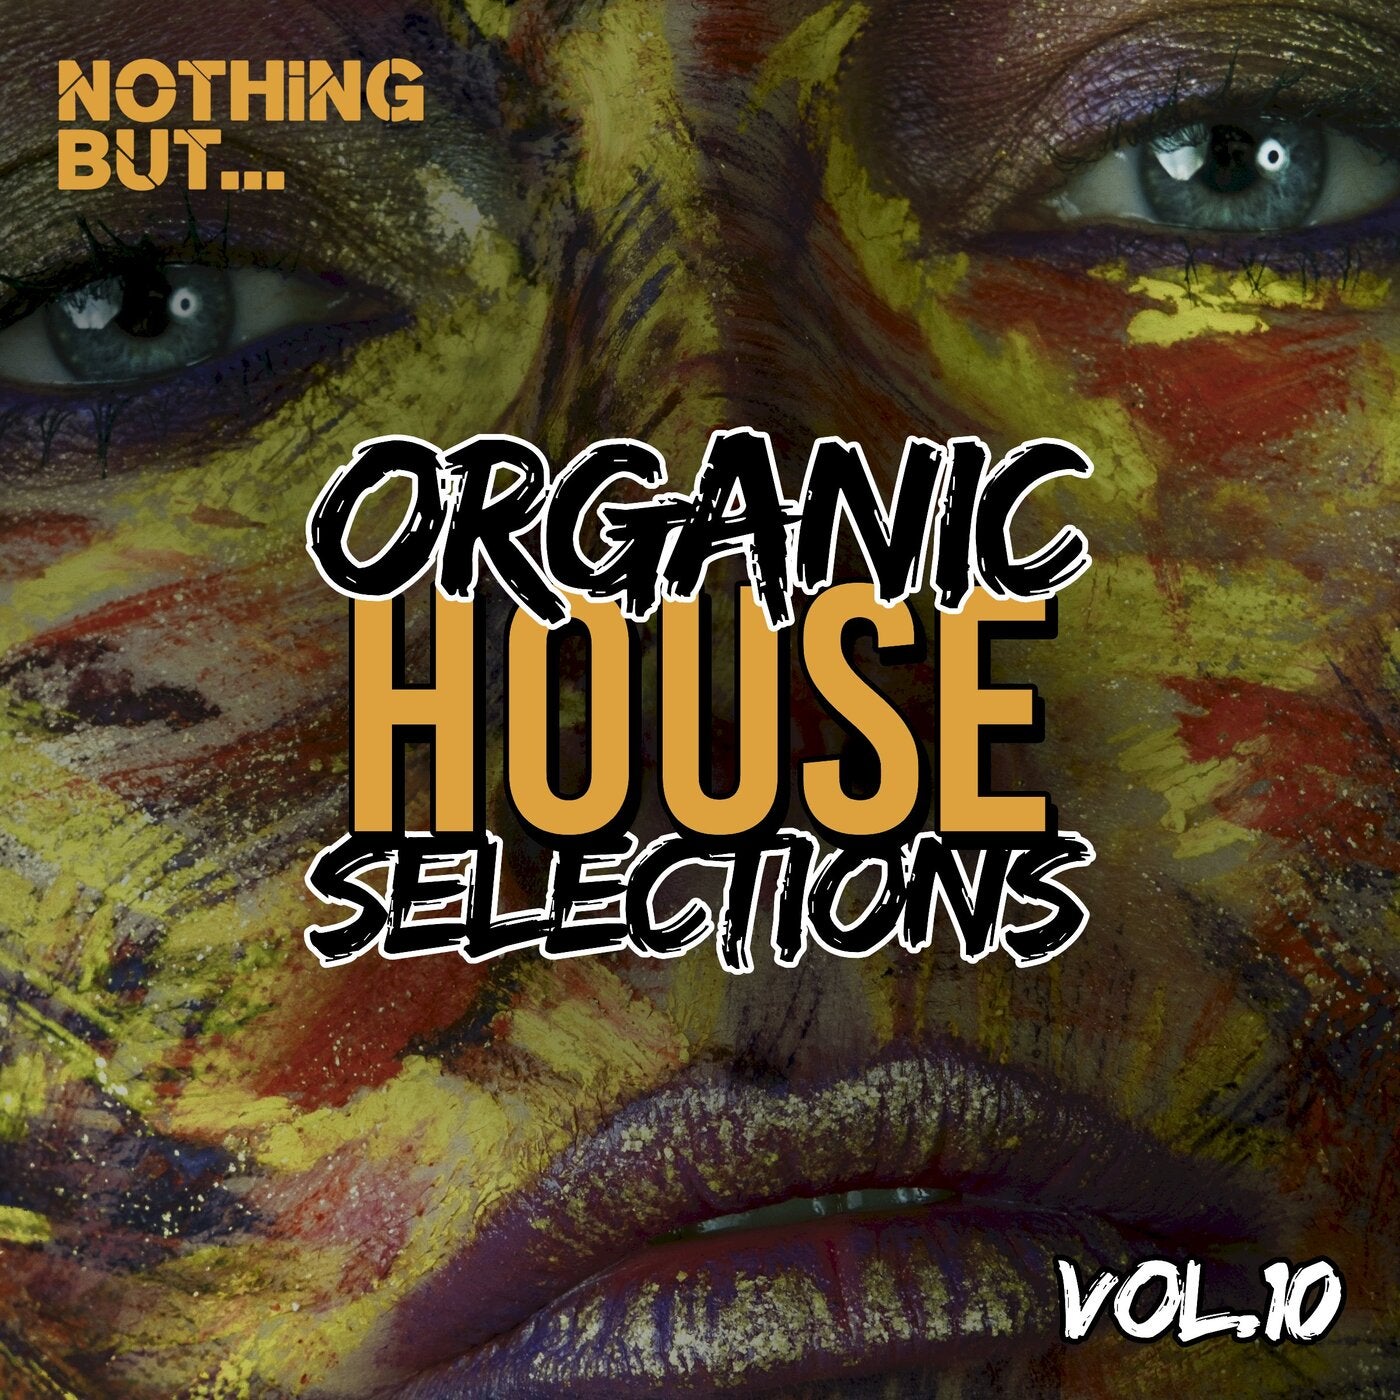 ADHM, Balata & Achex - Nothing But... Organic House Selections, Vol. 10 [Nothing But]